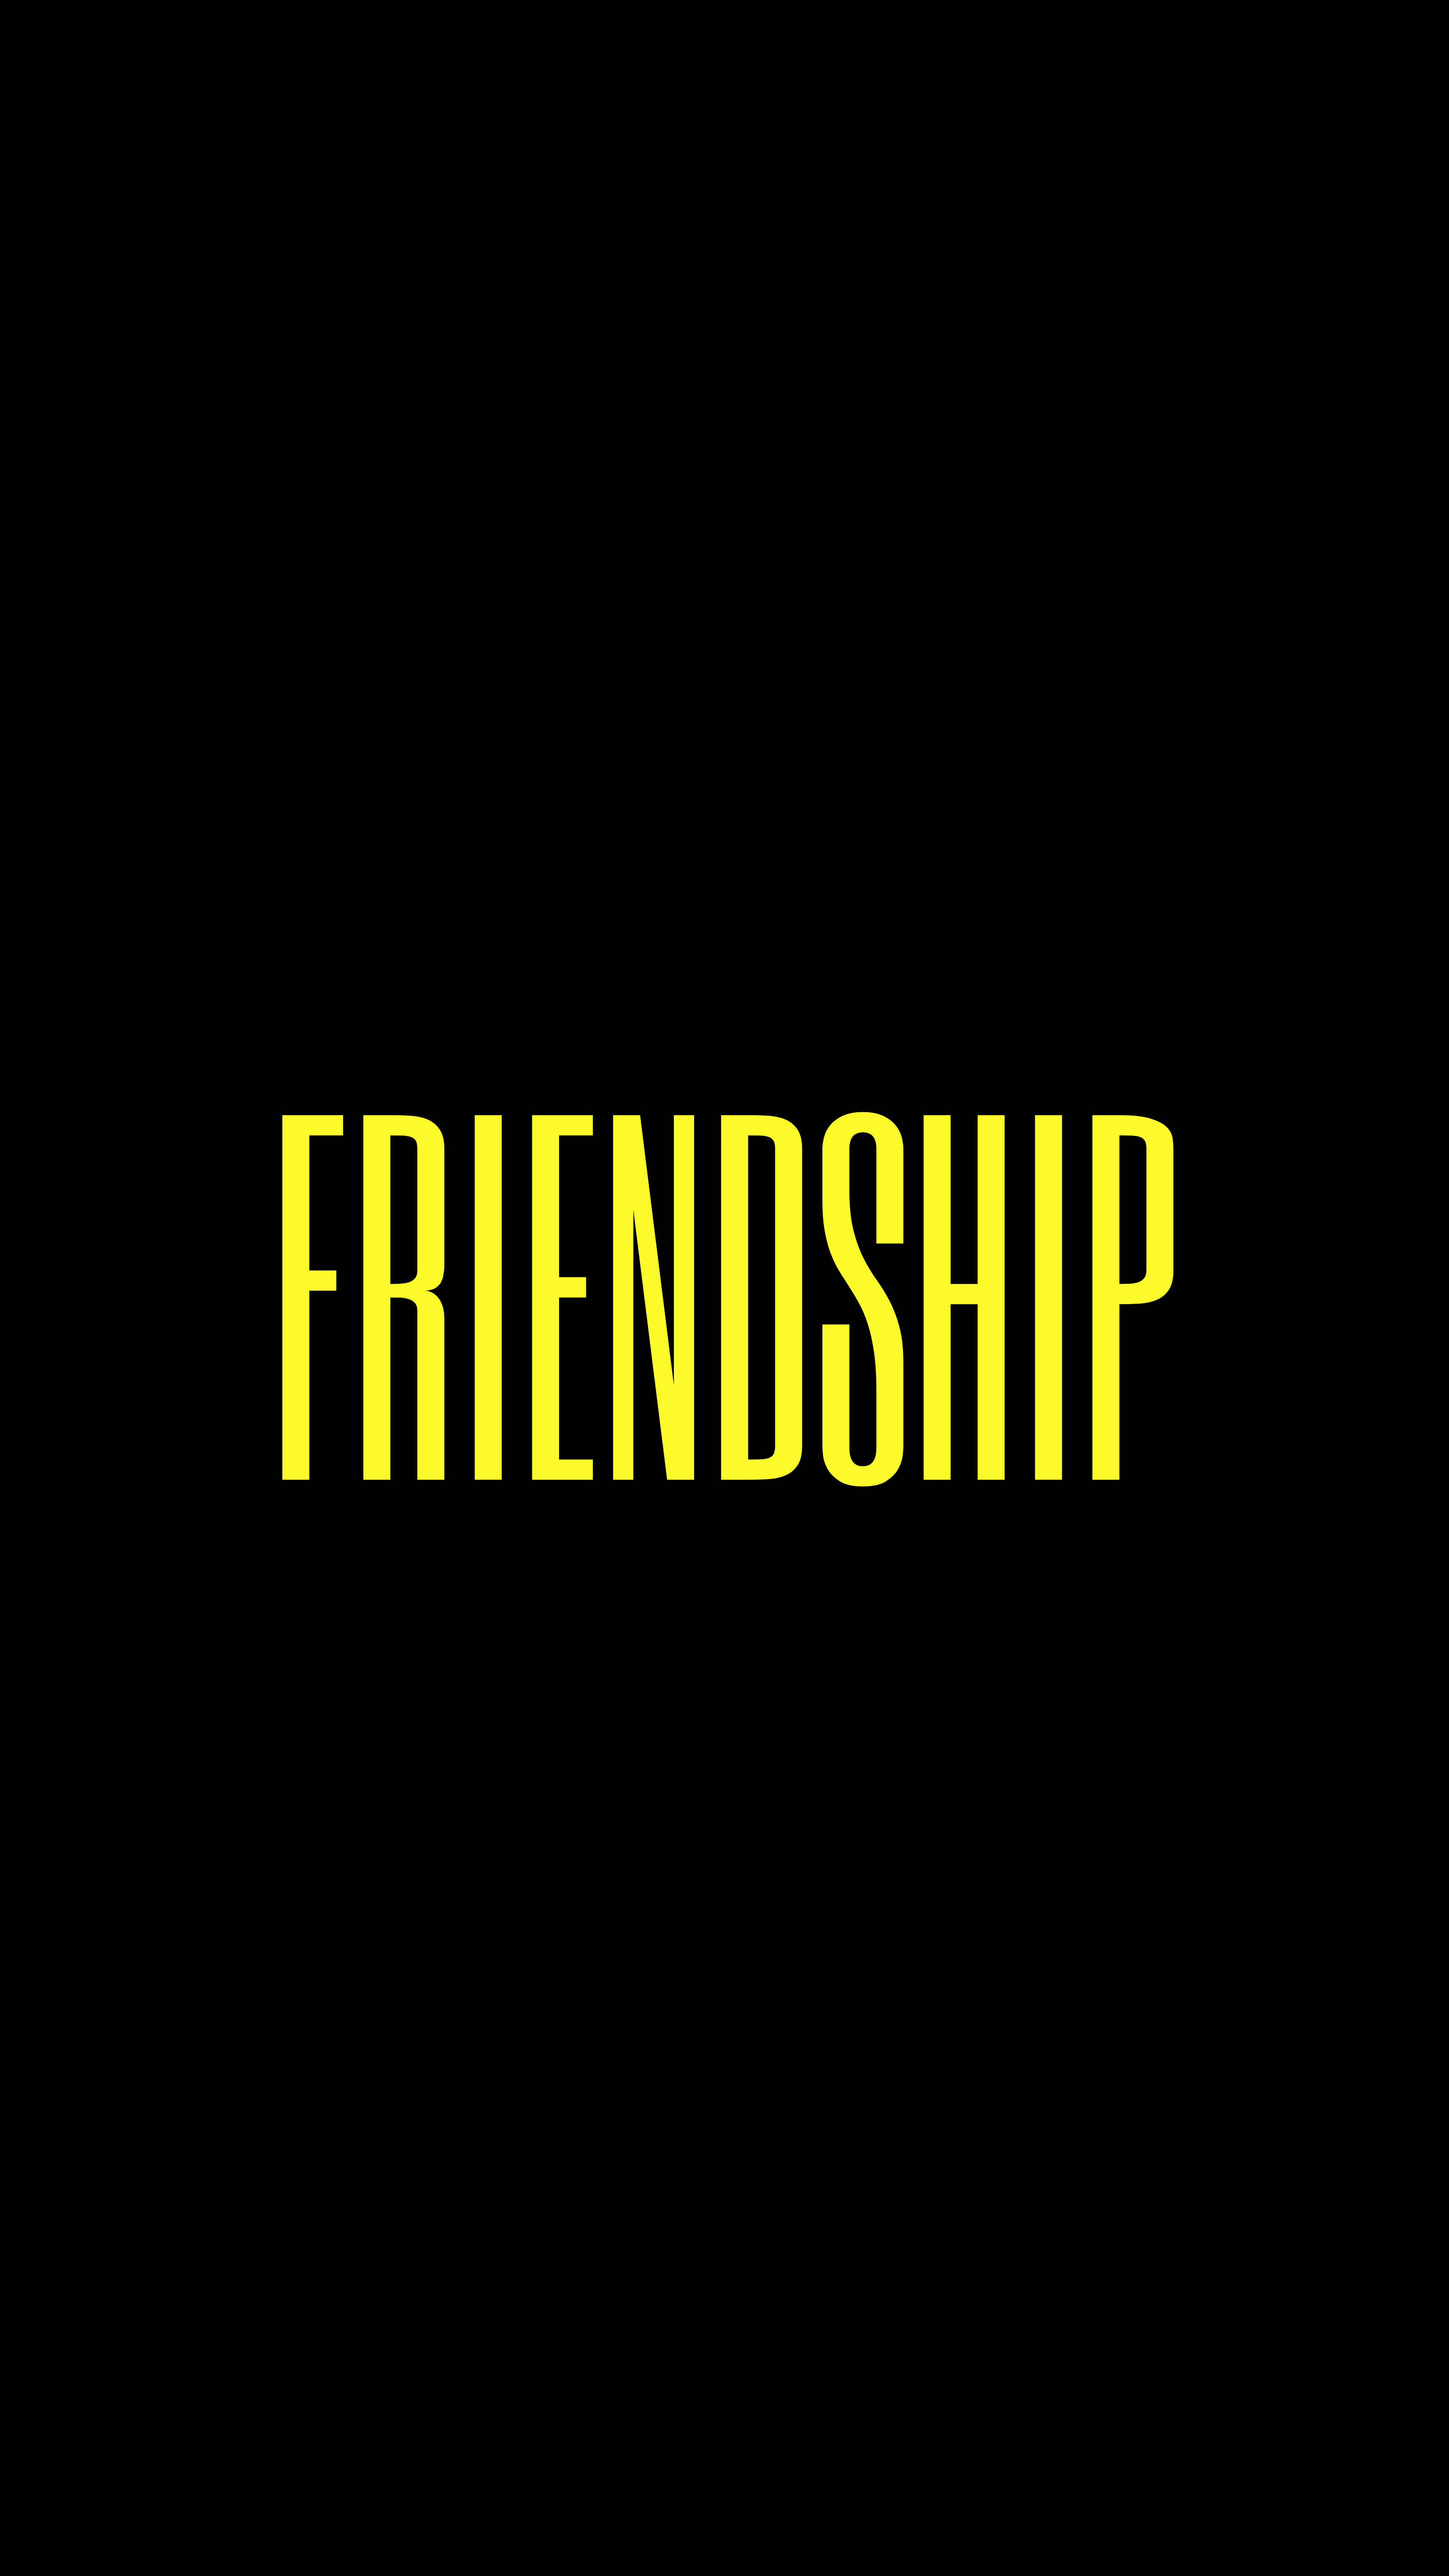 Download Friendship Black And Yellow Texts Wallpaper | Wallpapers.com